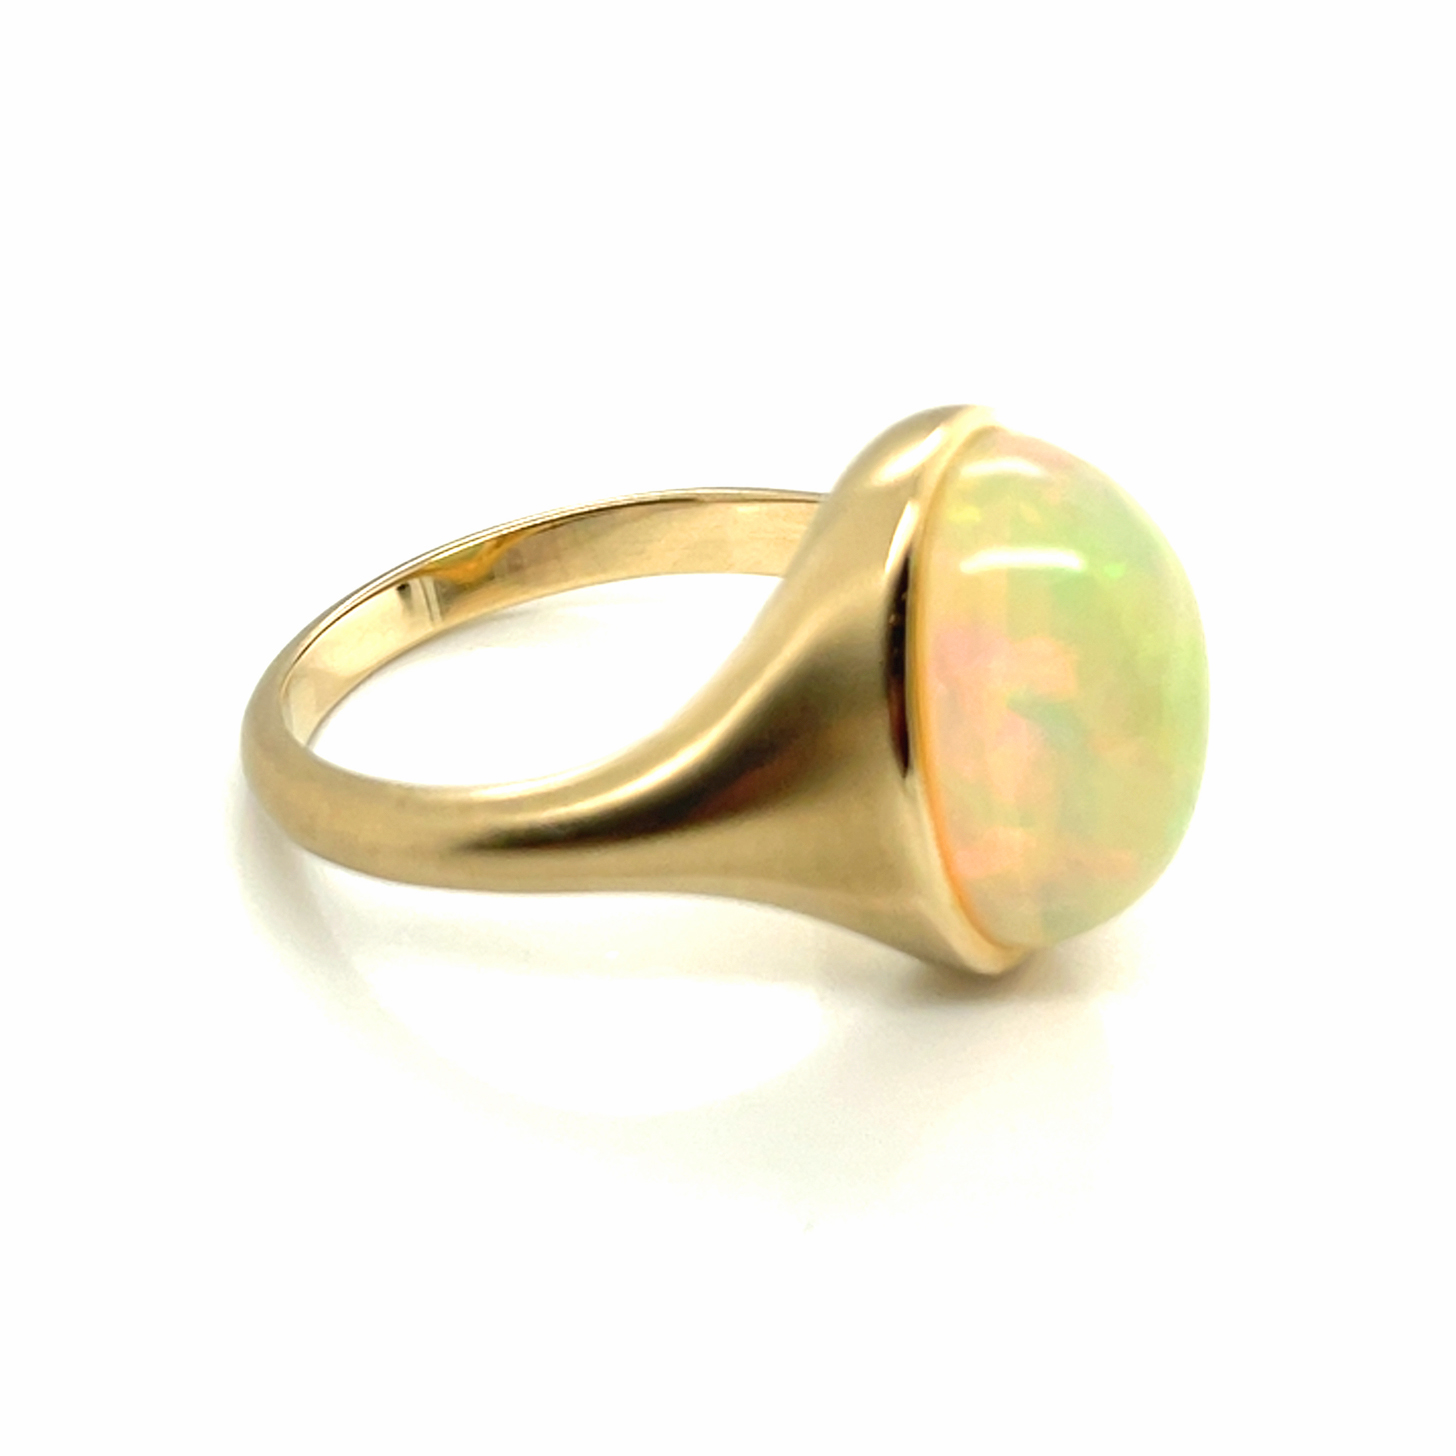 Kristallopal, gold-opalisierend, oval Cabochon, ca. 3,40 ct. Edelstein Ring Gelbgold 375/000 Sogni d´oro Terra Opalis